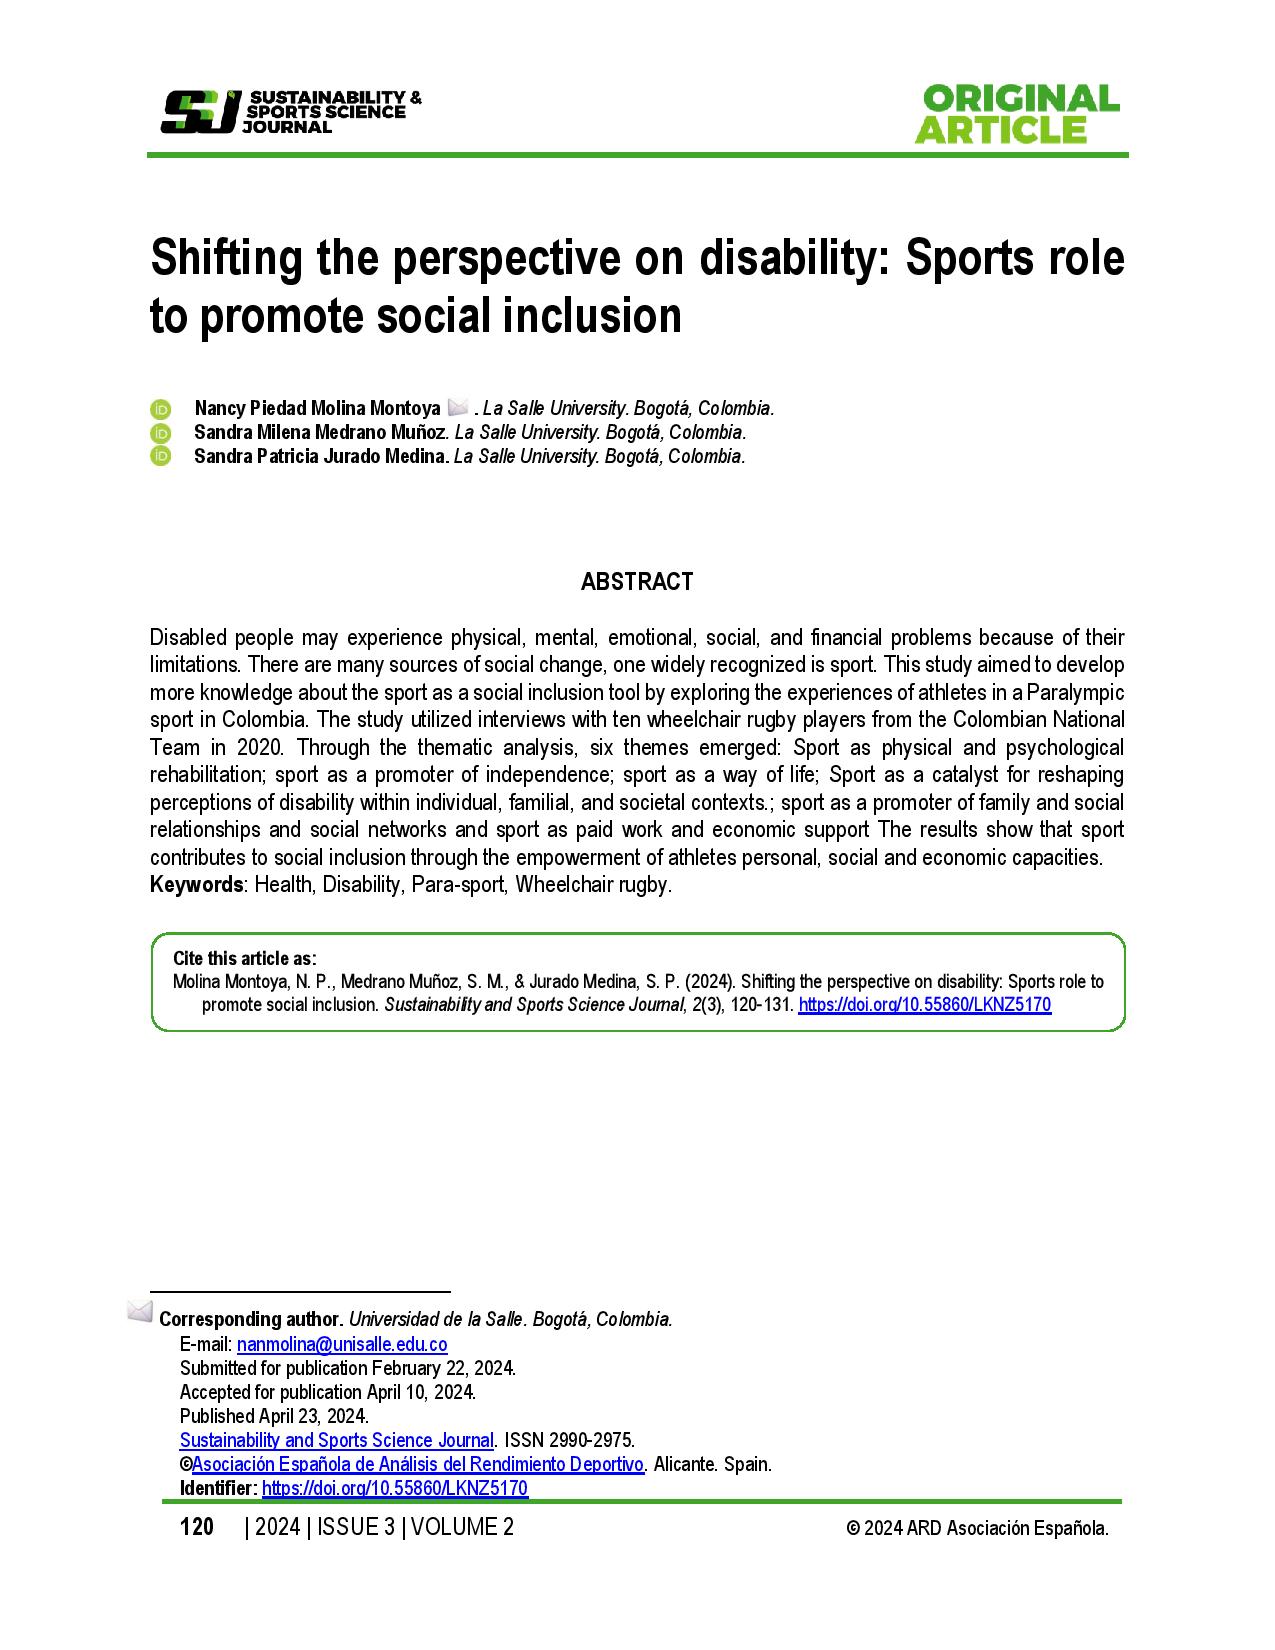 Shifting the perspective on disability: Sports role to promote social inclusion